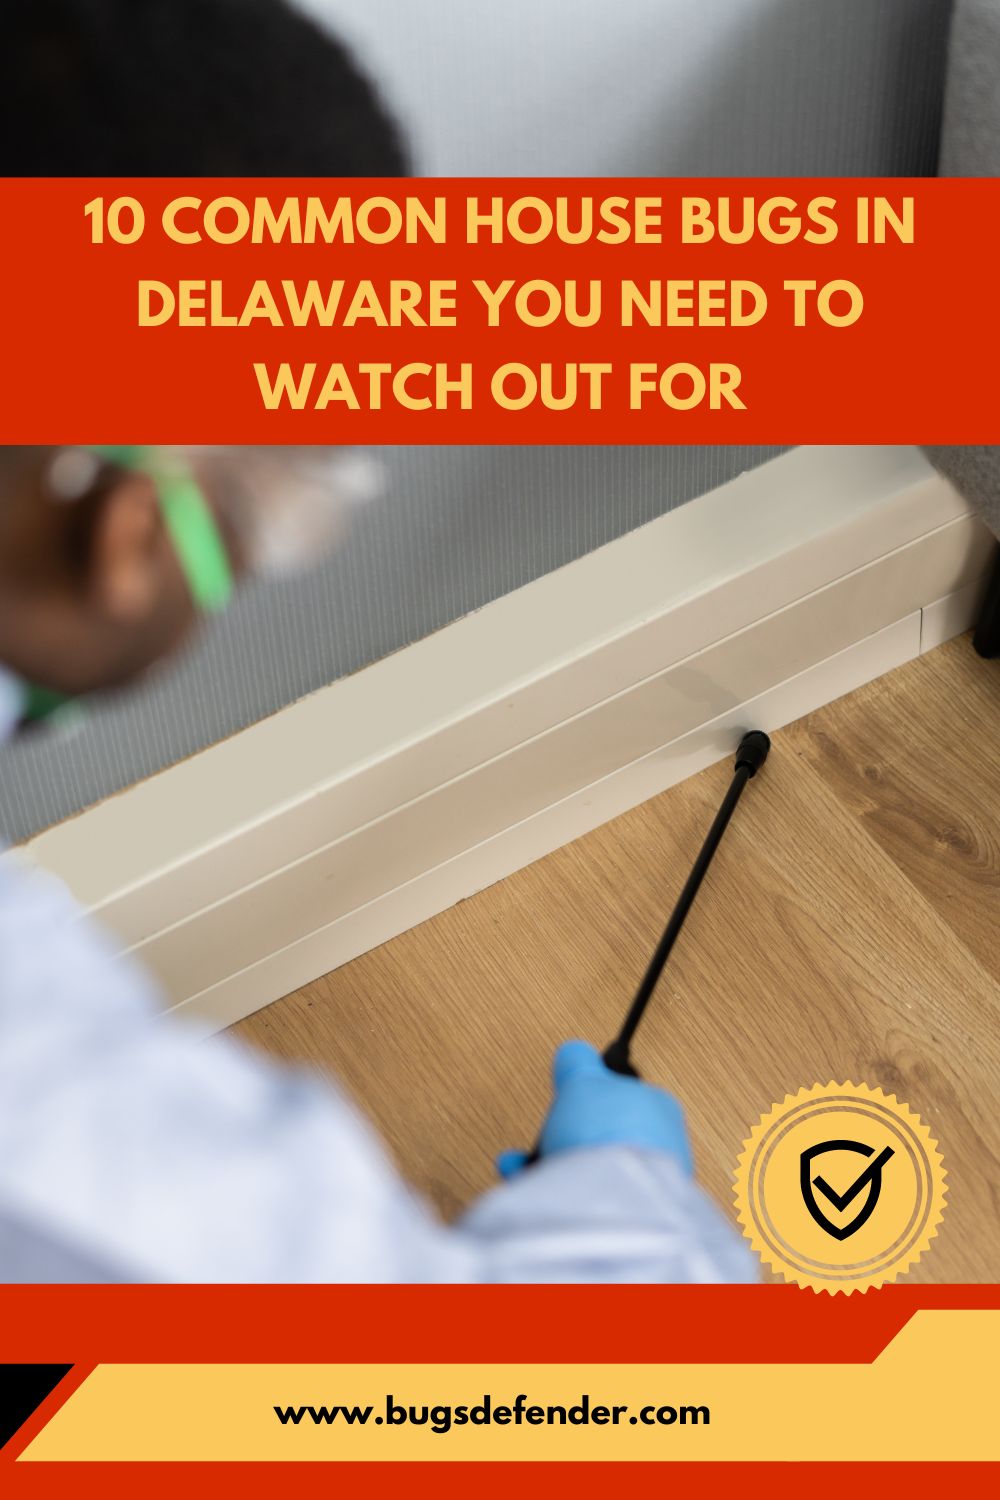 10 Common House Bugs In Delaware You Need To Watch Out For pin 2